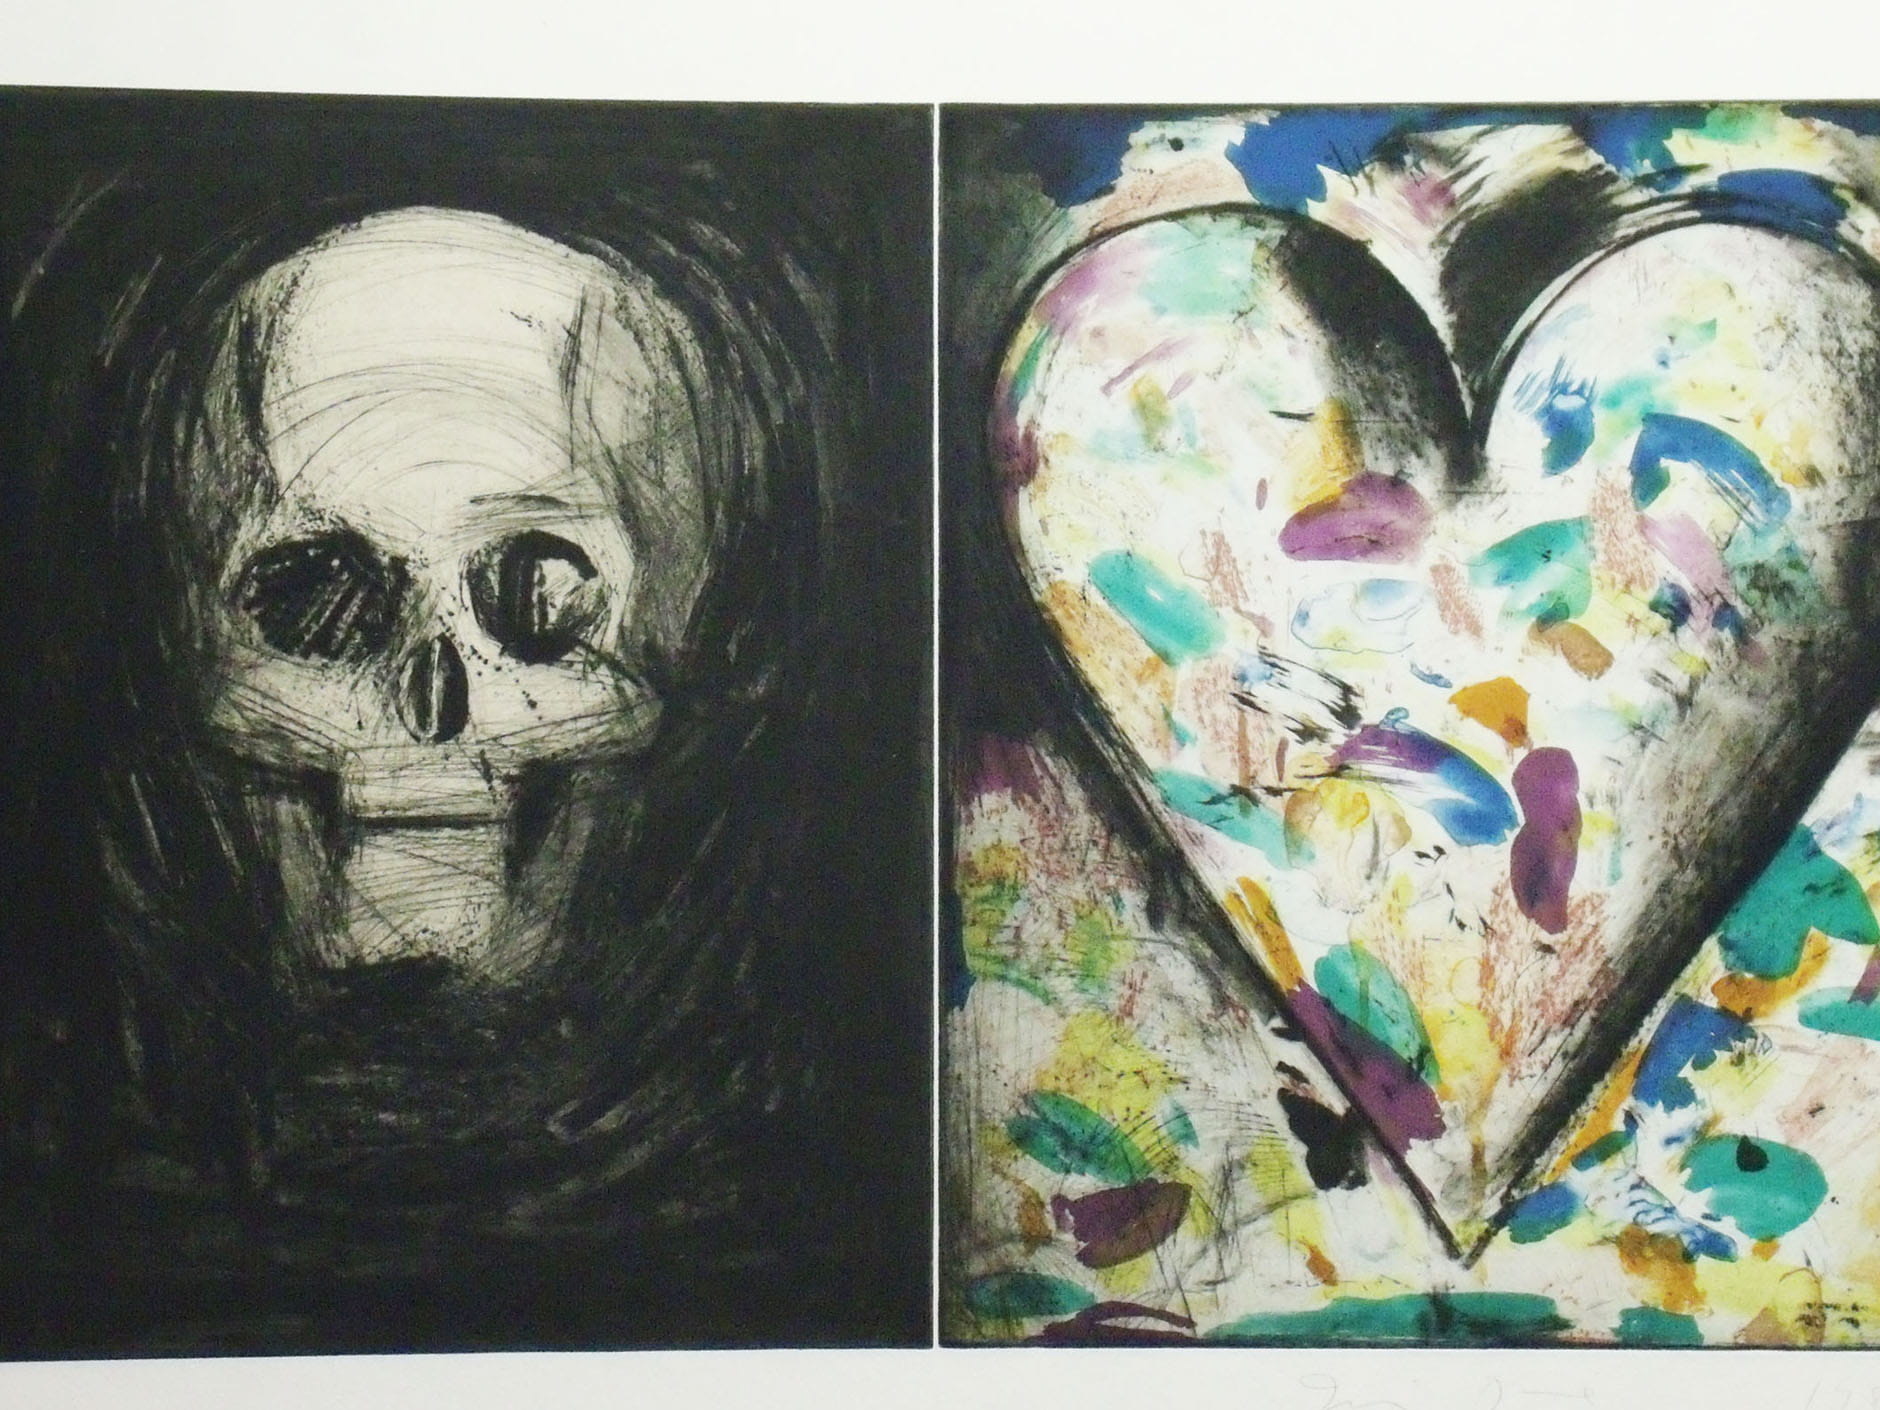 Jim Dine, Sovereign Nights, 1986, 24 x 40, drypoint, color aquatint with chine colle